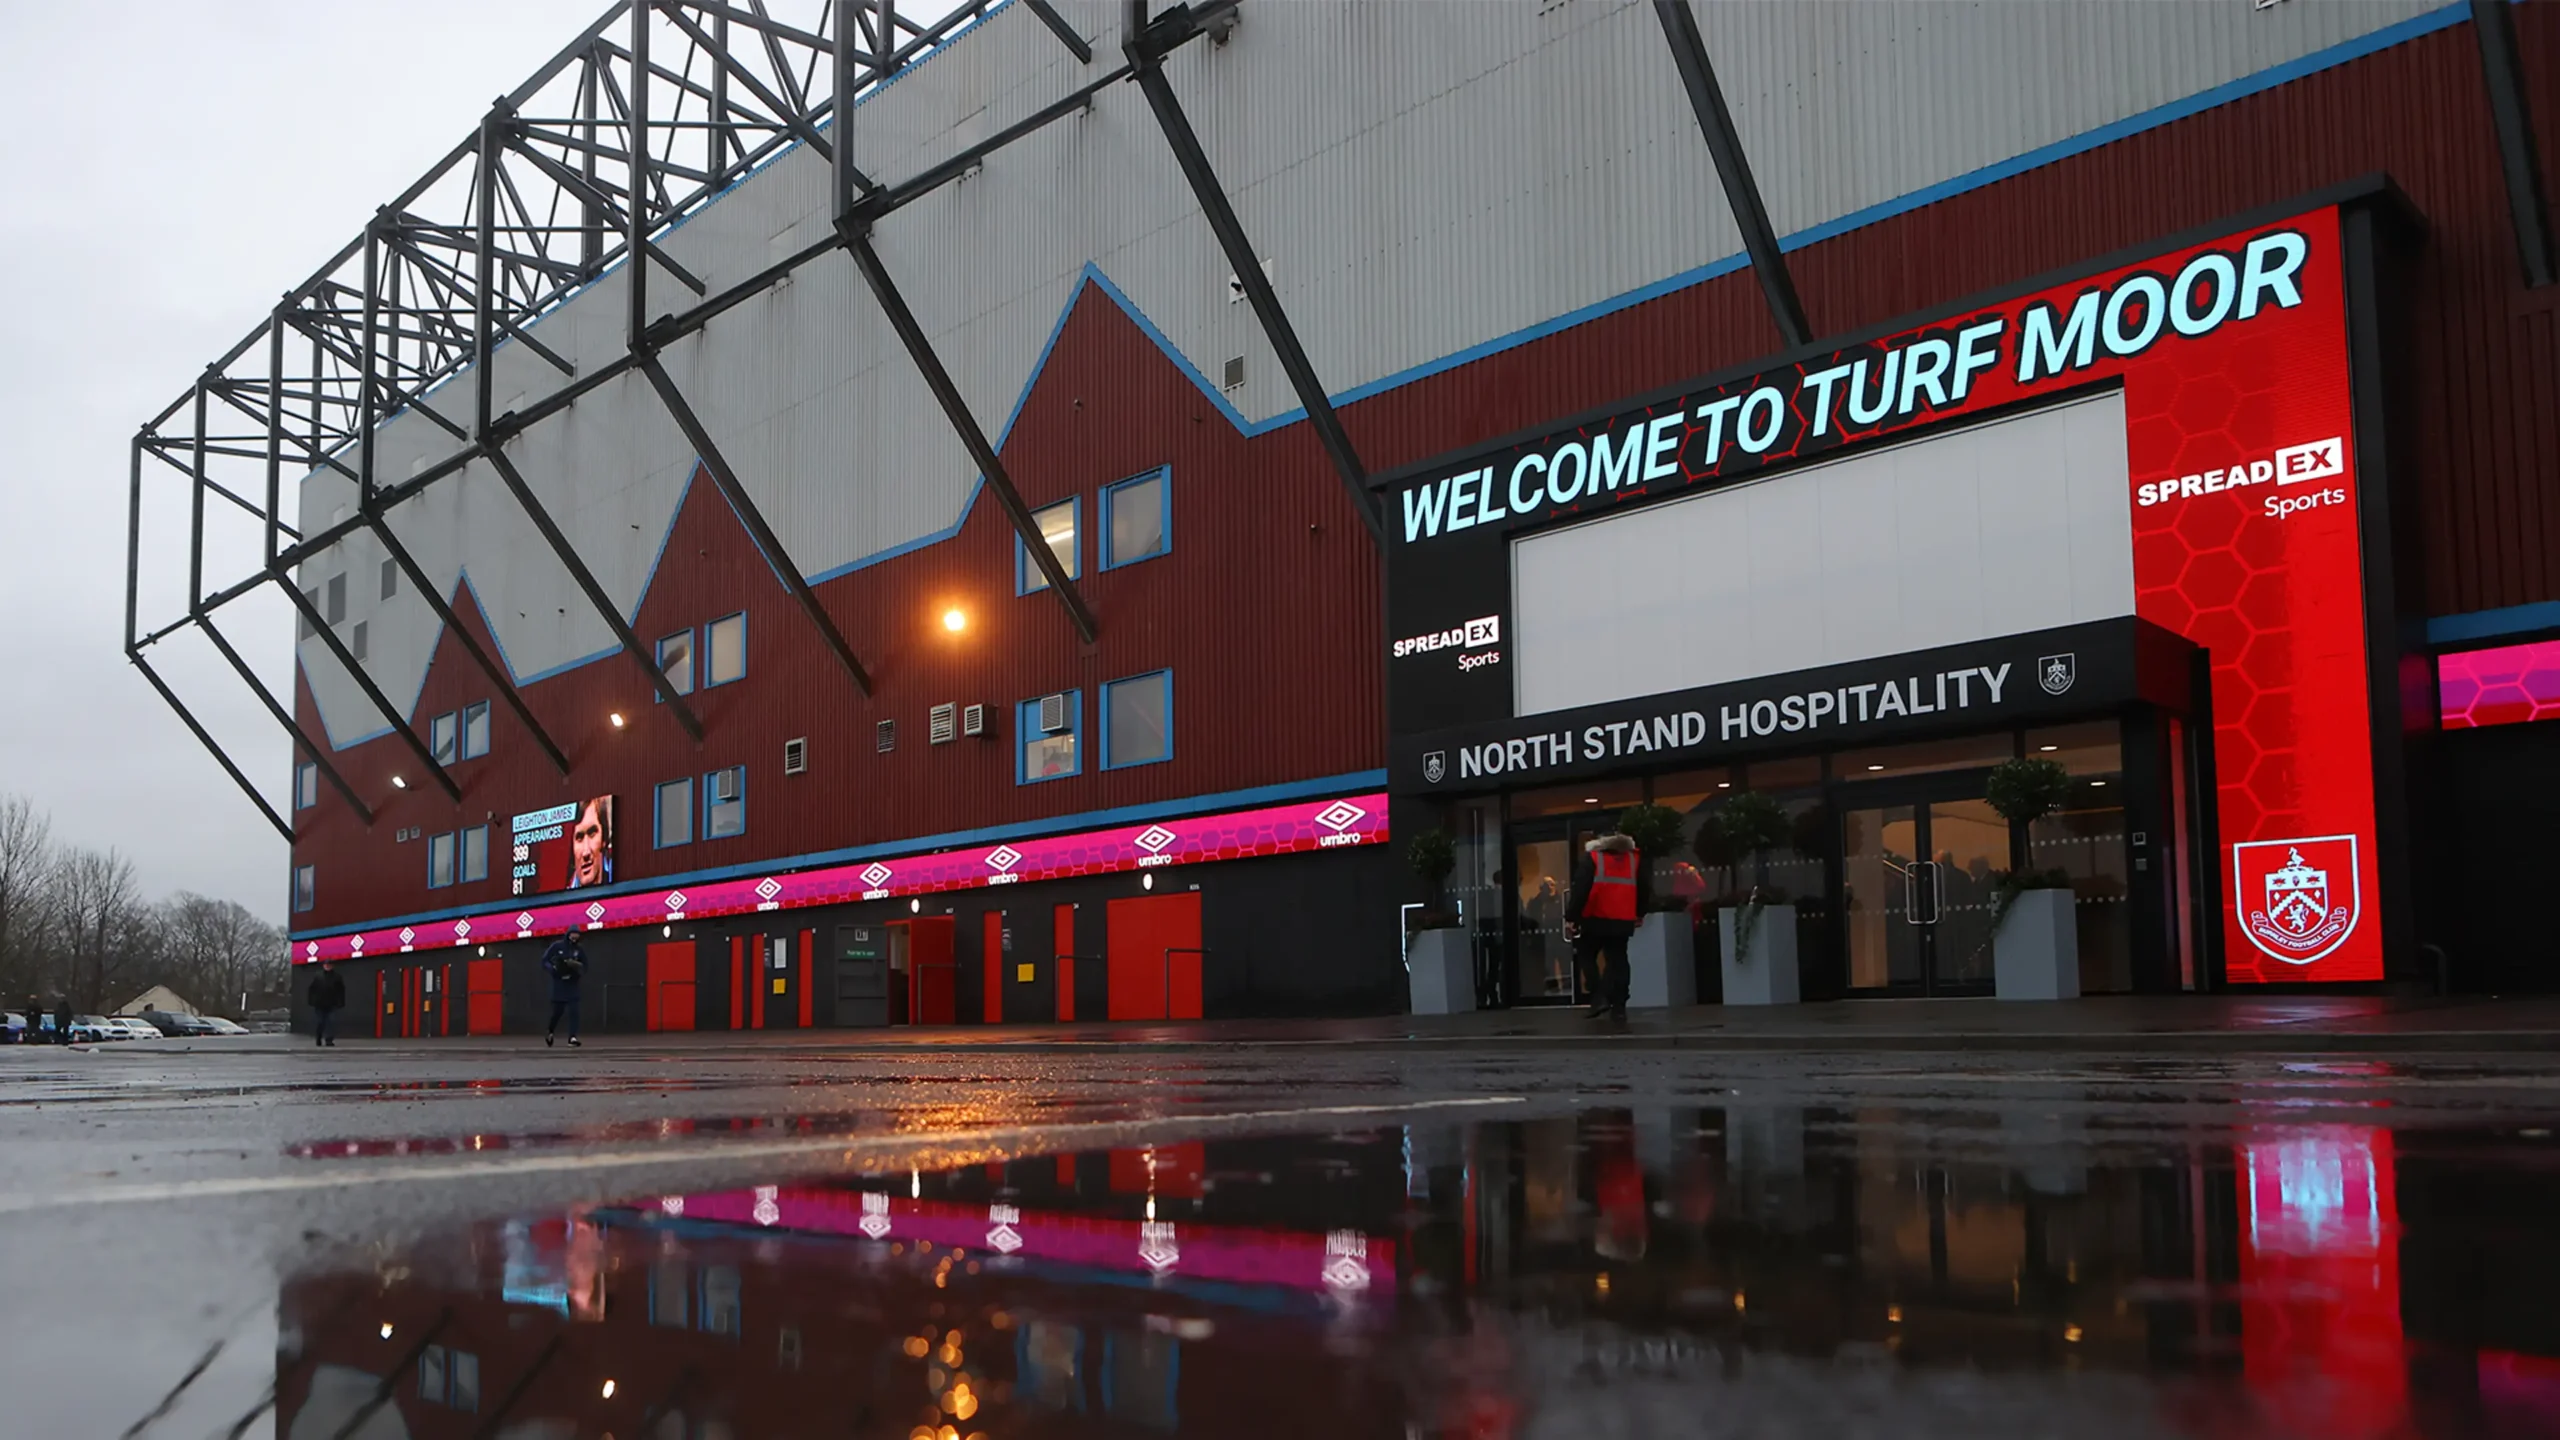 Turf Moor: The Fortress and Historic Home of Burnley FC